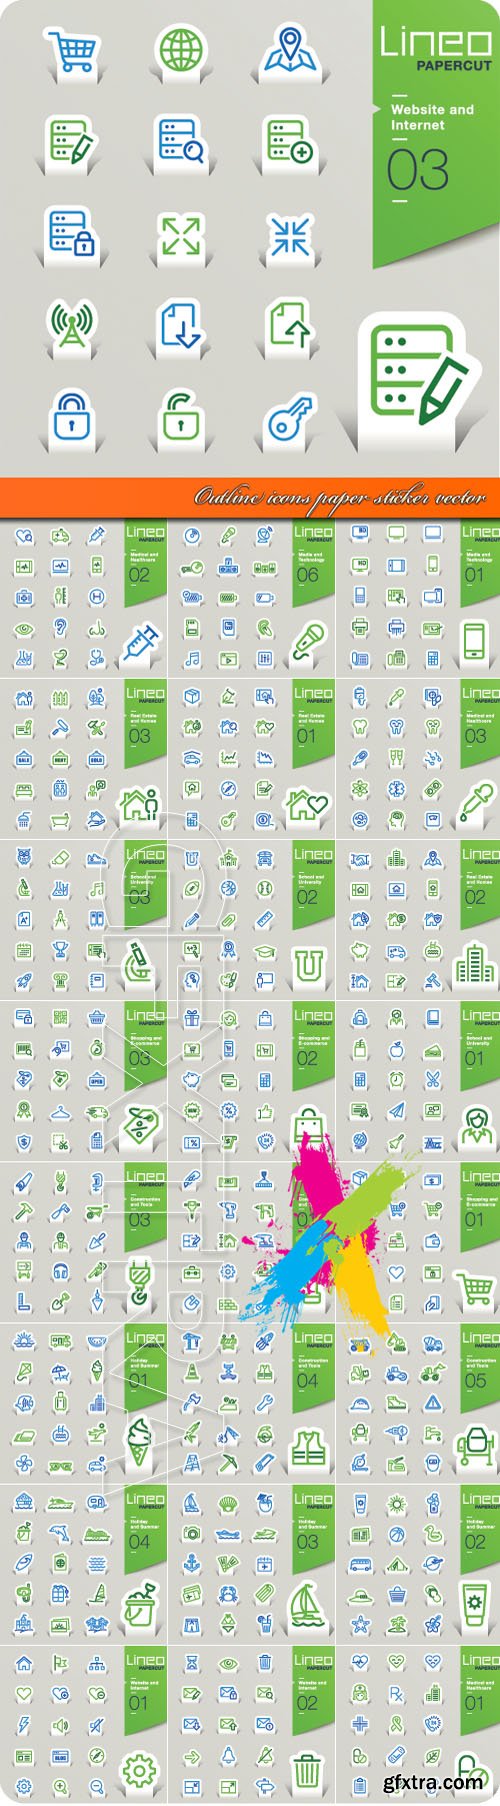 Outline icons paper sticker vector